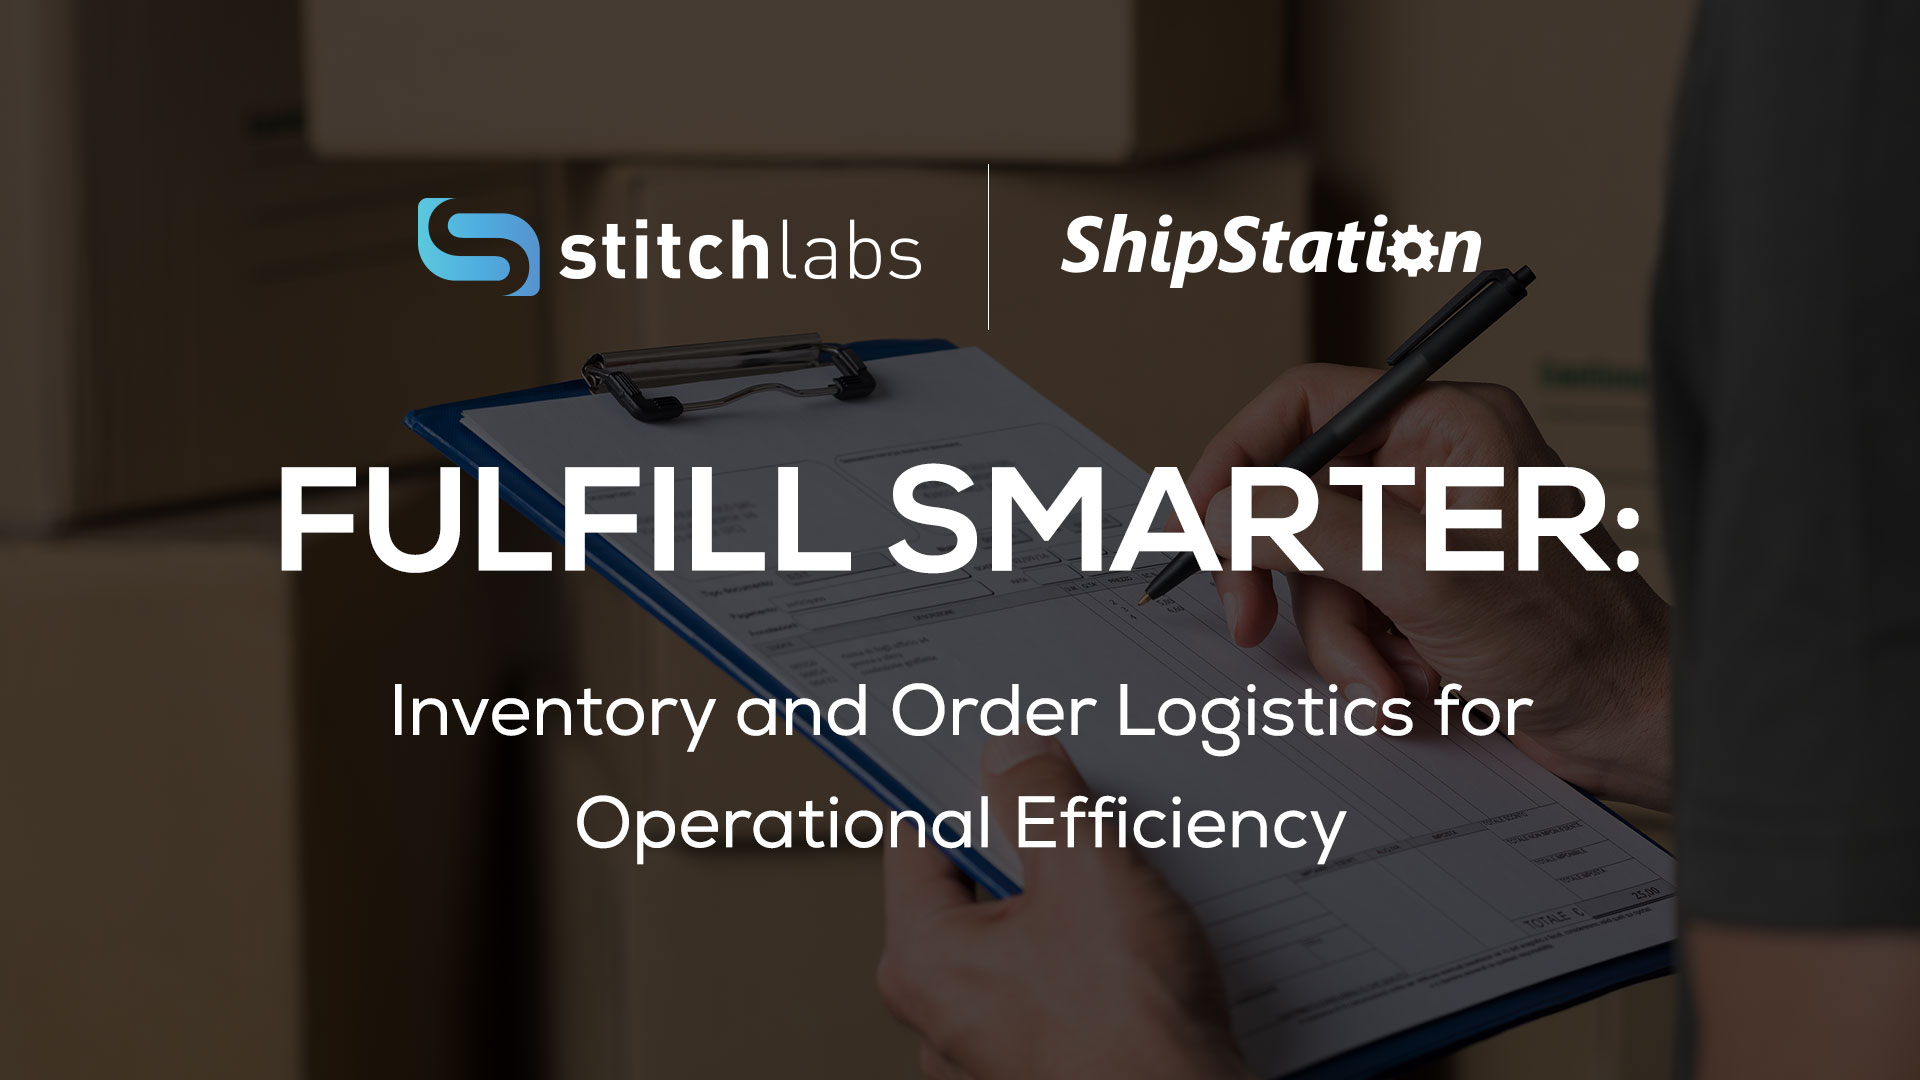 stitchlabs + shipstation fulfill smarter